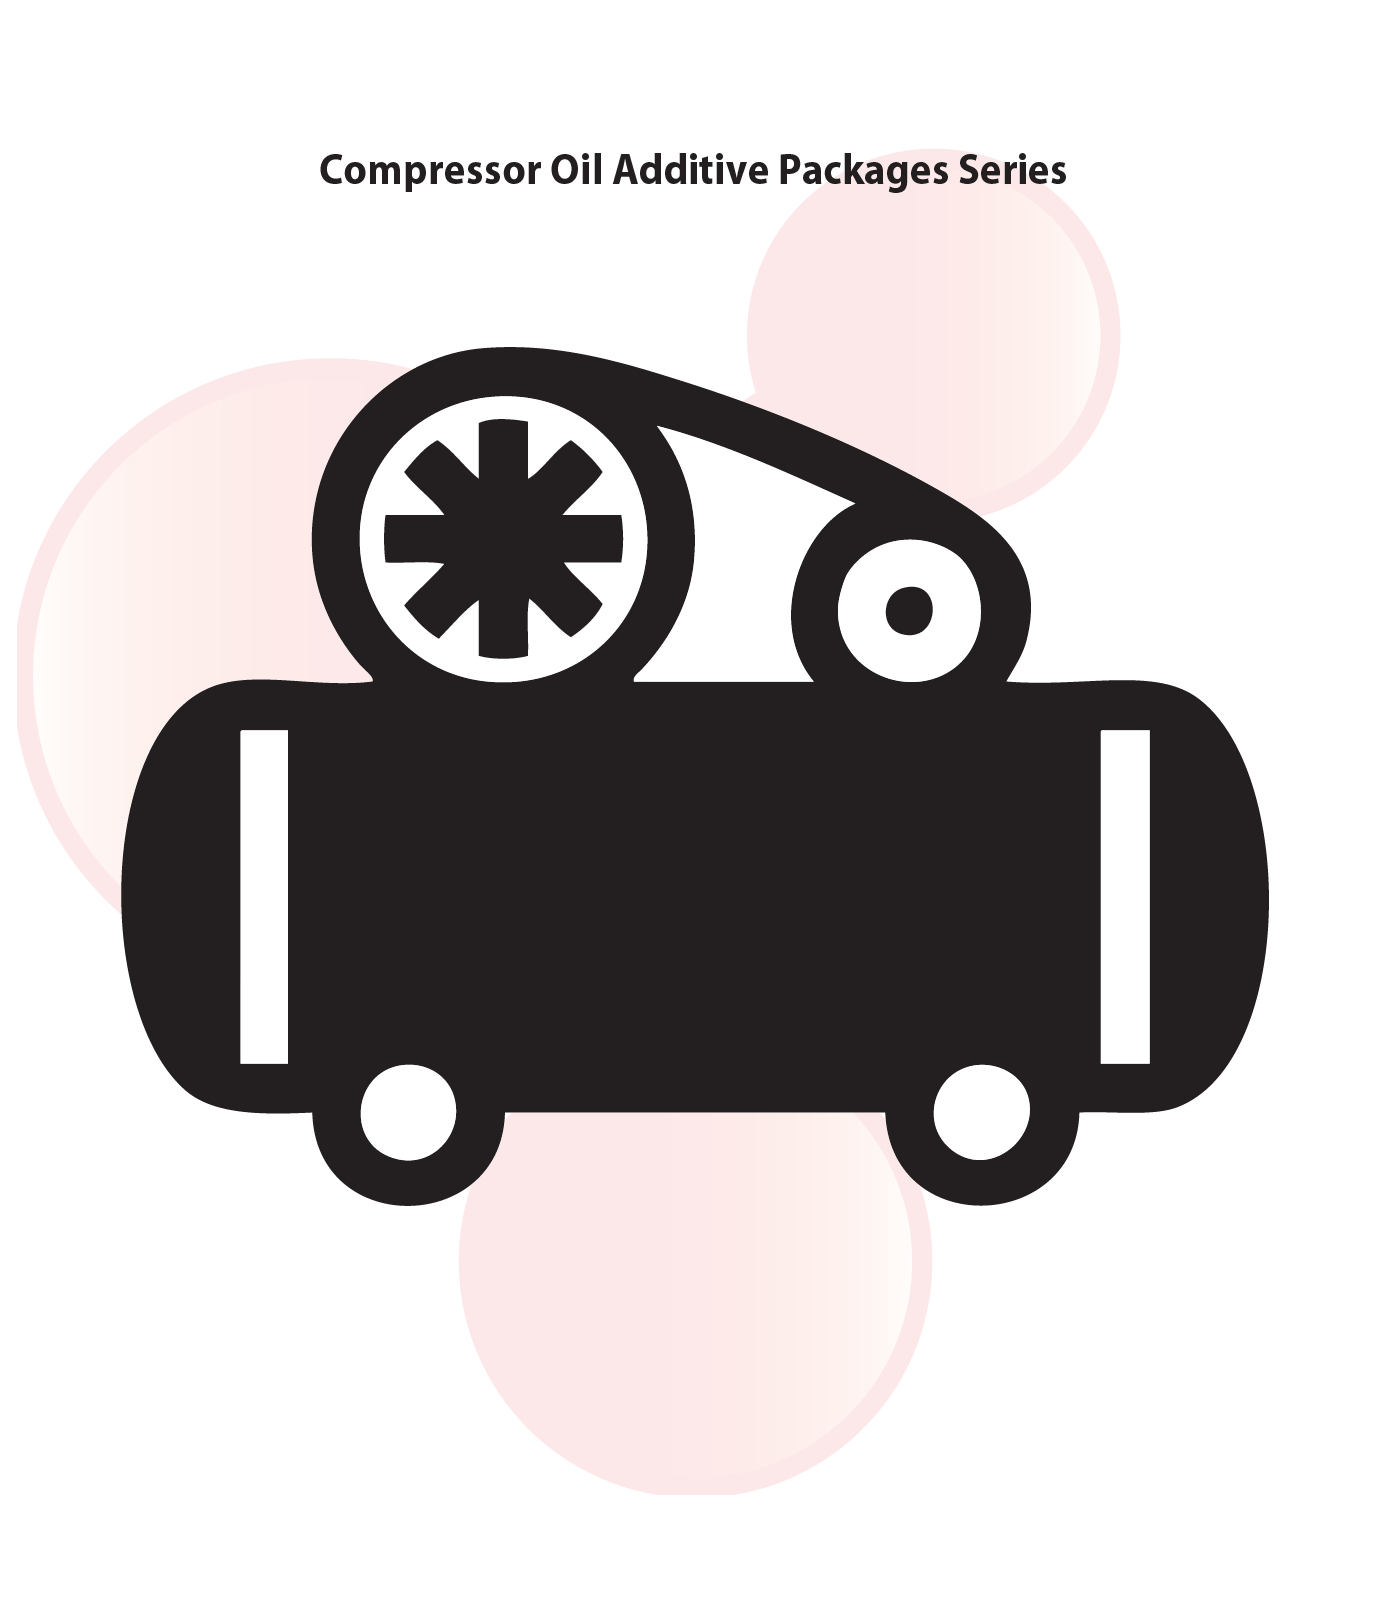 Compressor Oil Additive Packages Series